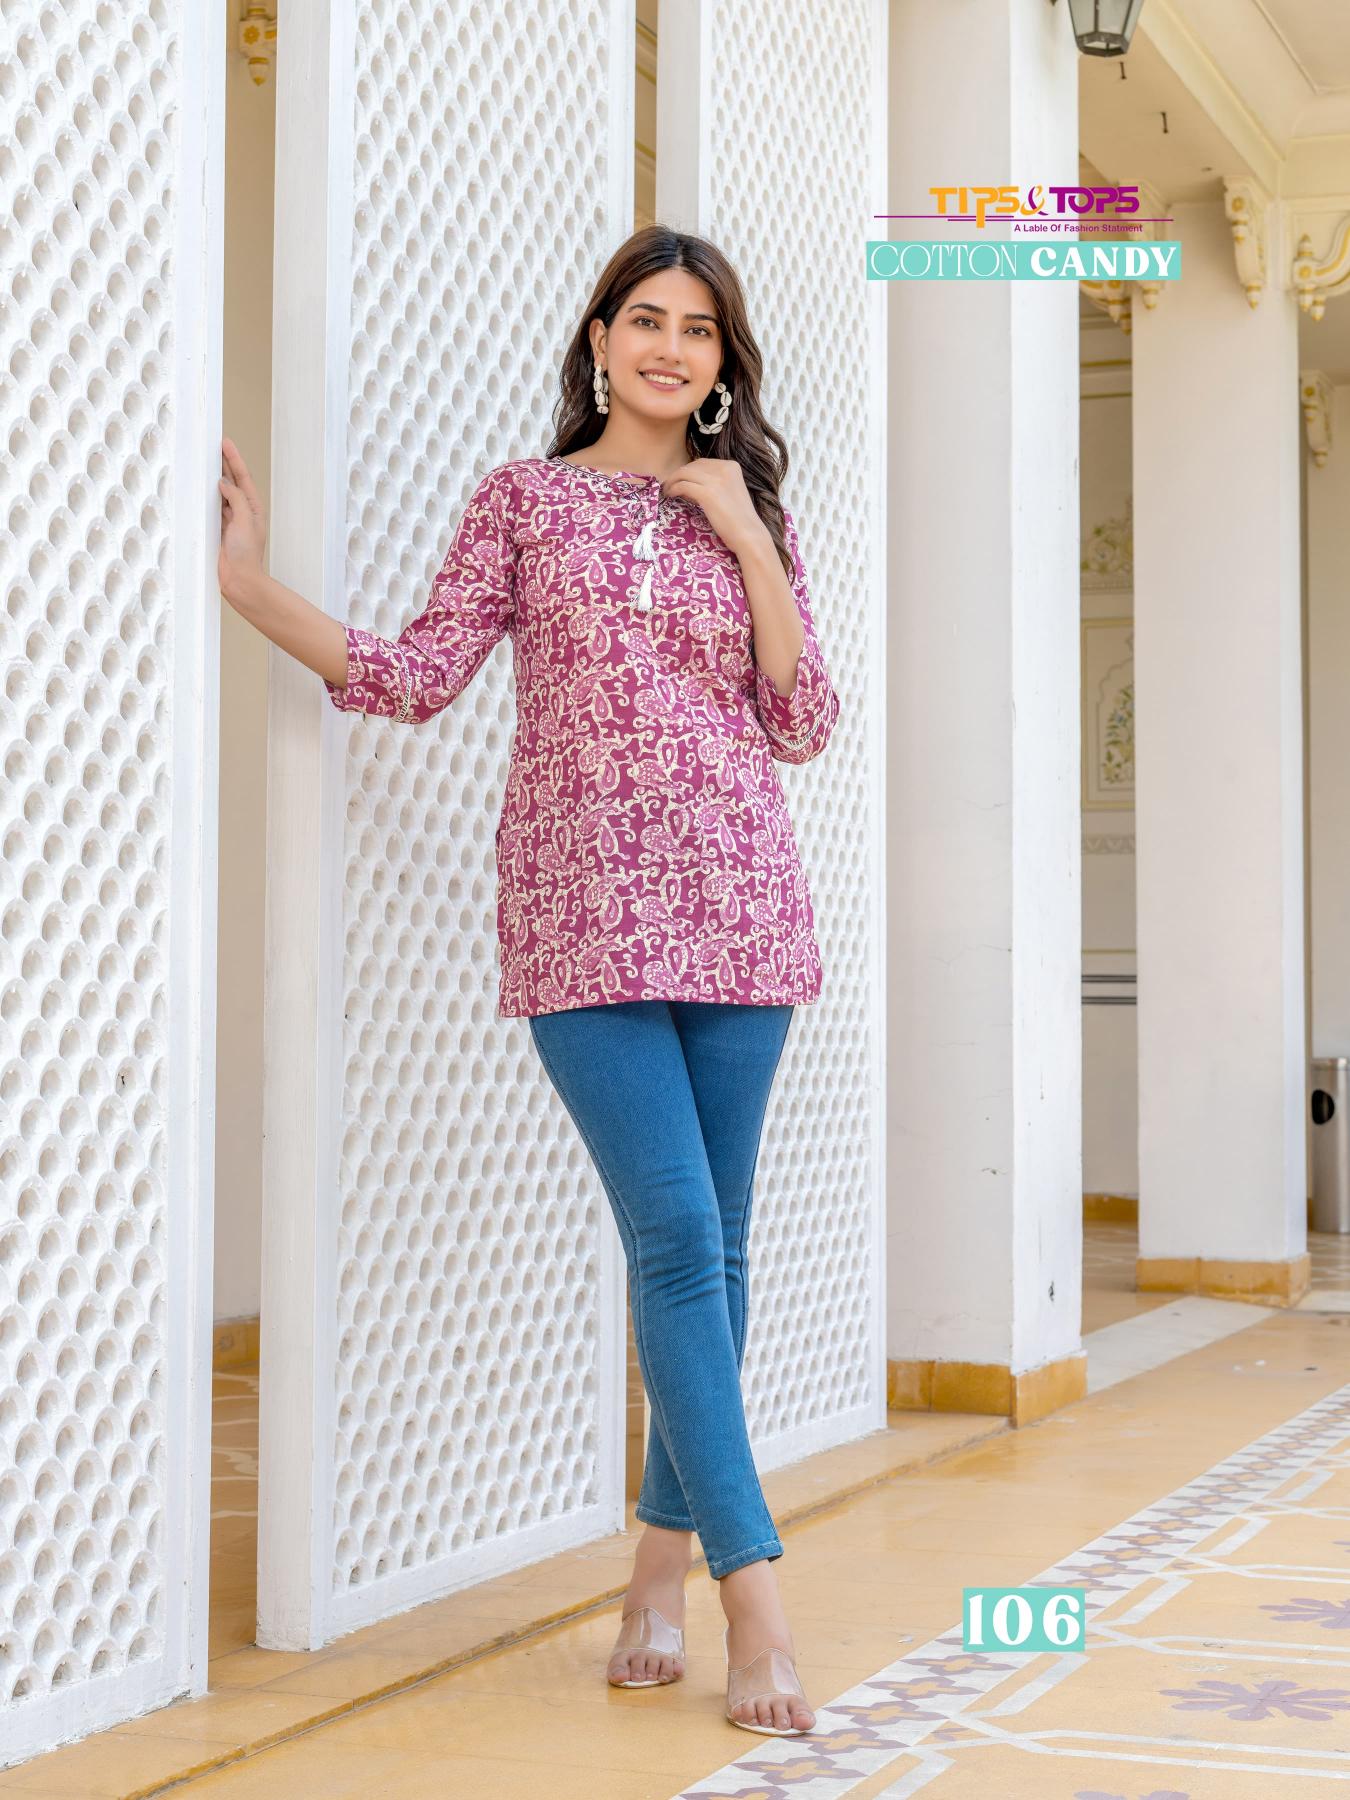 Tips And Tops Cotton Candy Vol 4 Short Tops wholesale catalog